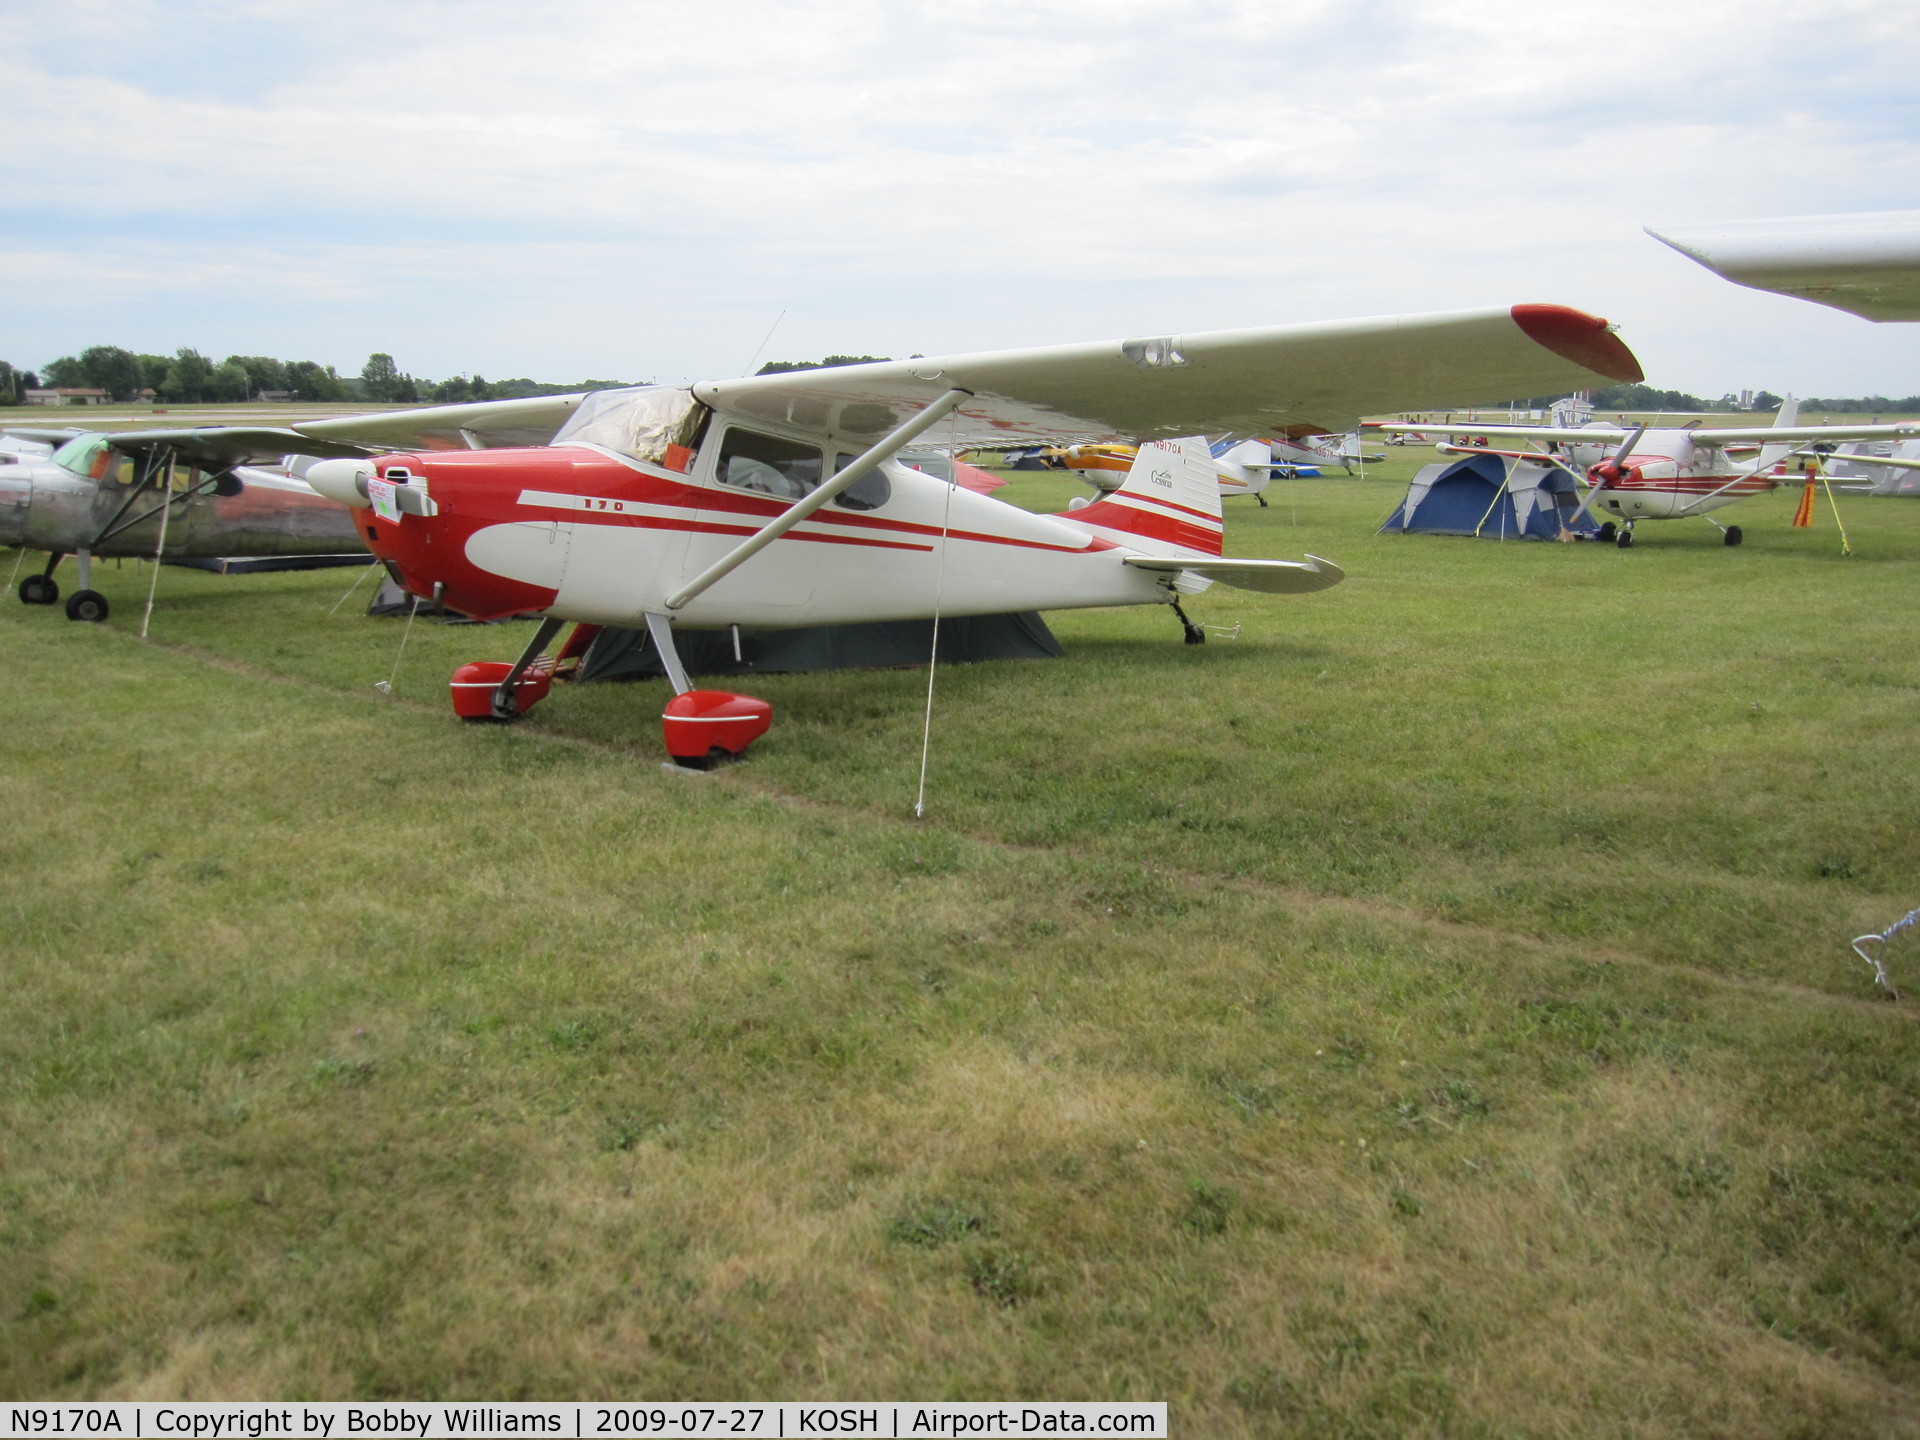 N9170A, 1950 Cessna 170A C/N 19361, Tied down at EAA AirVenture 2009